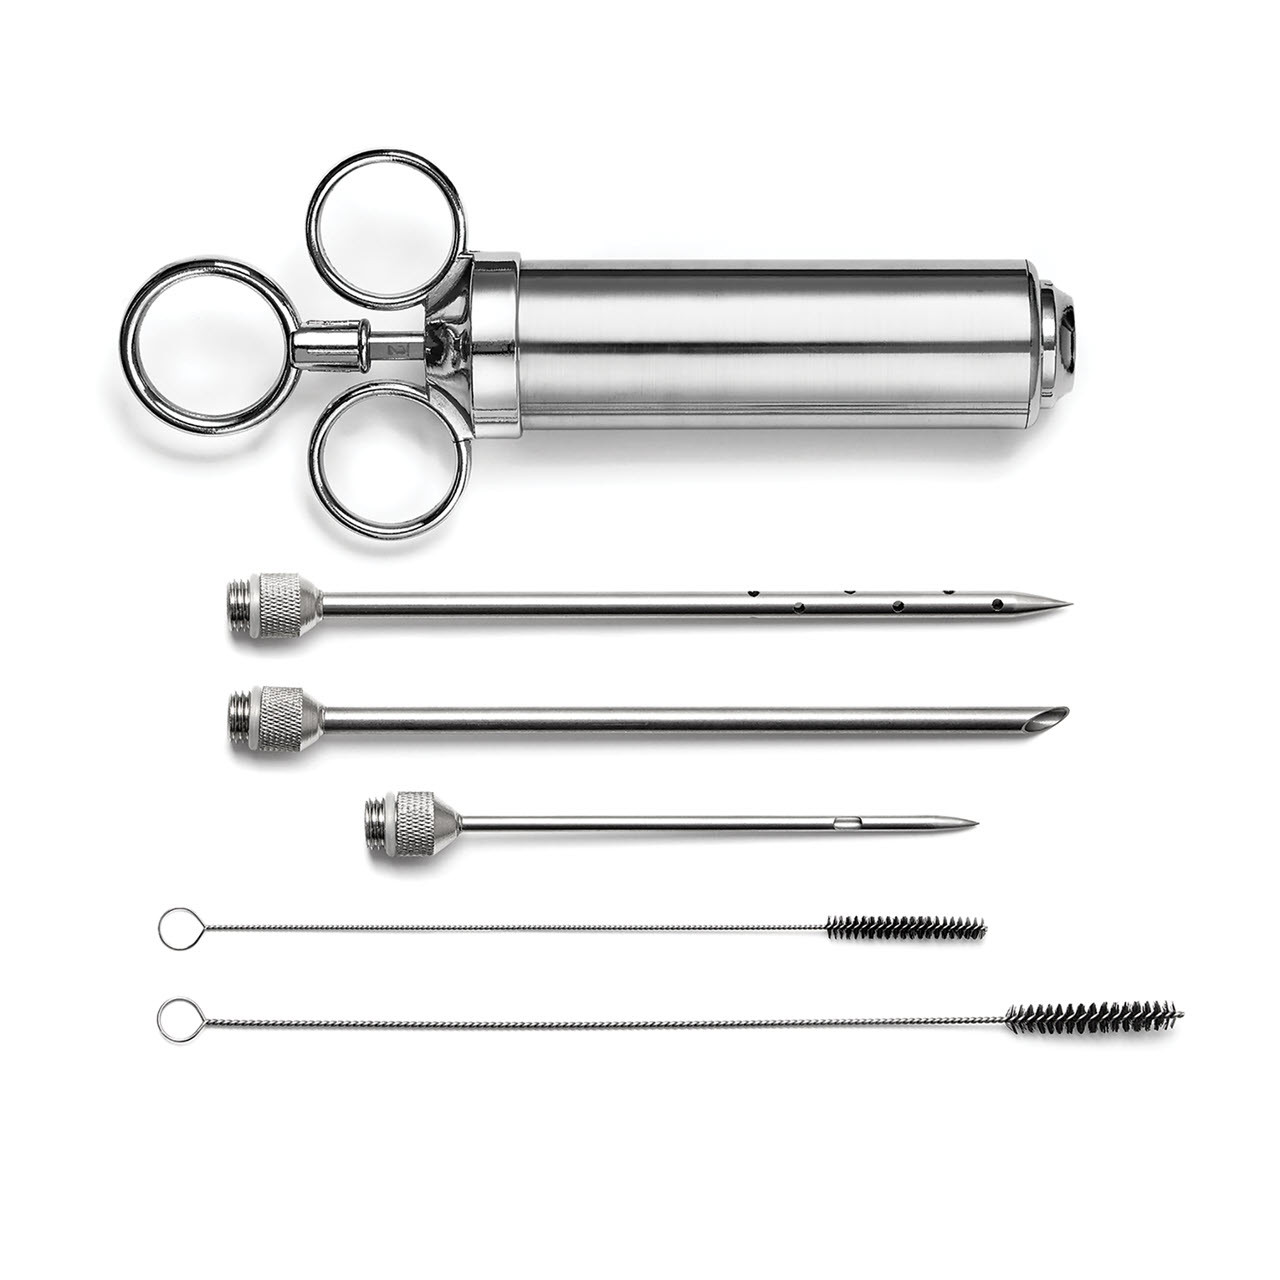 https://cdn11.bigcommerce.com/s-21kj3ntgv1/images/stencil/1280x1280/products/140/613/Injector-Set-Stainless-Steel-6-pieces__89334.1628894606.jpg?c=2